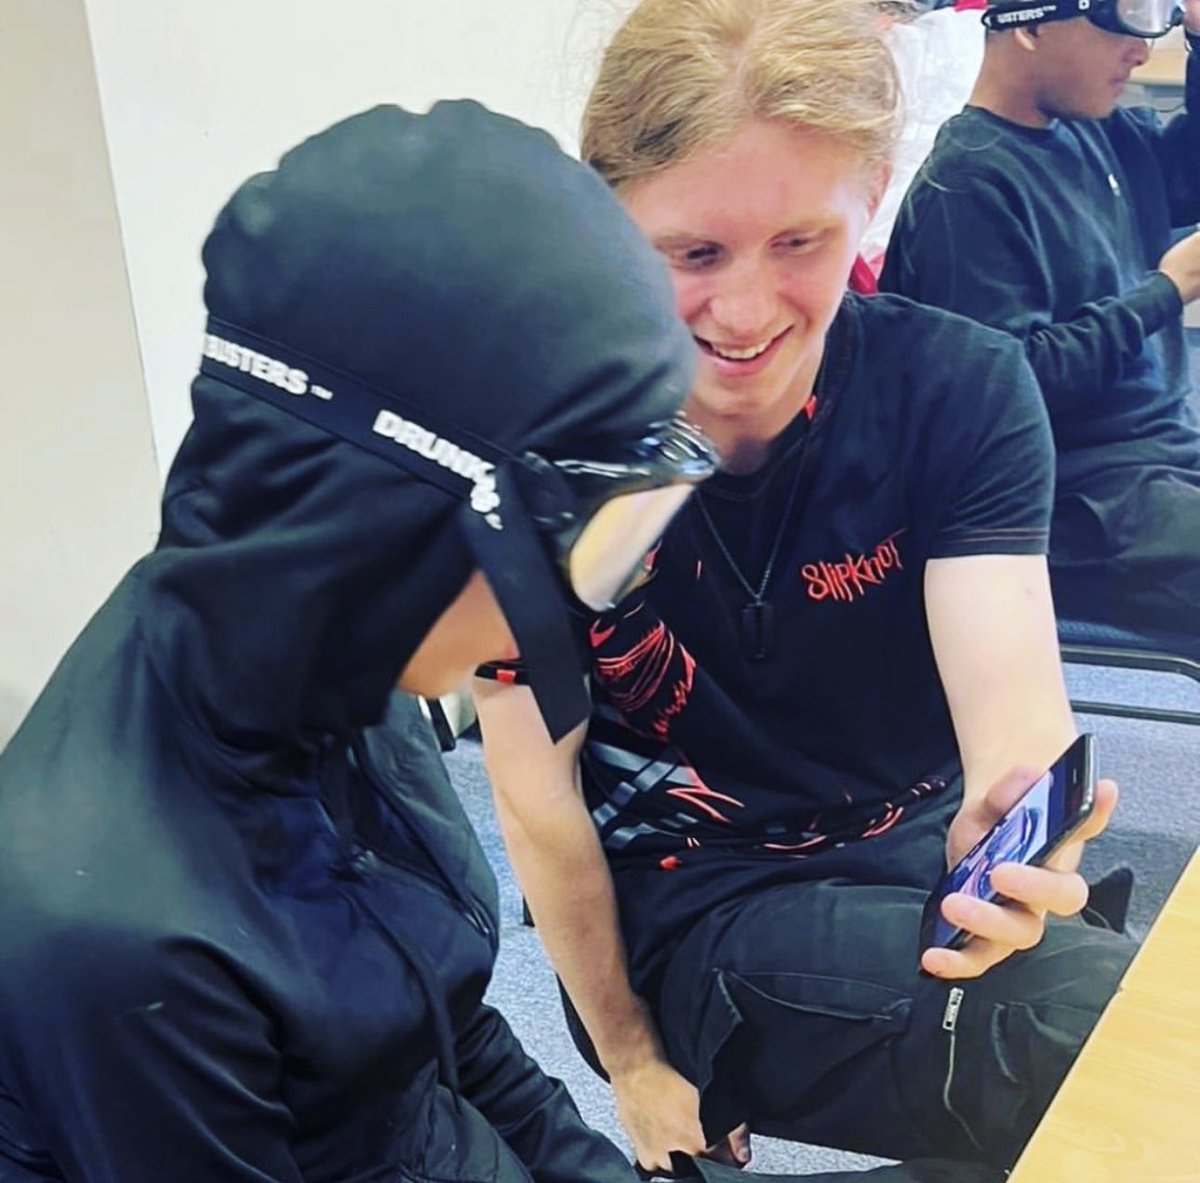 Today our Get Ready for Summer Programme JGW+ learners welcomed Cath from Gwent n-gage who delivered an inspiring session around drugs, alcohol and vapes. The learners even got to give the drunk goggles go!! #gwentngage #JGW+ #getreadyforsummer